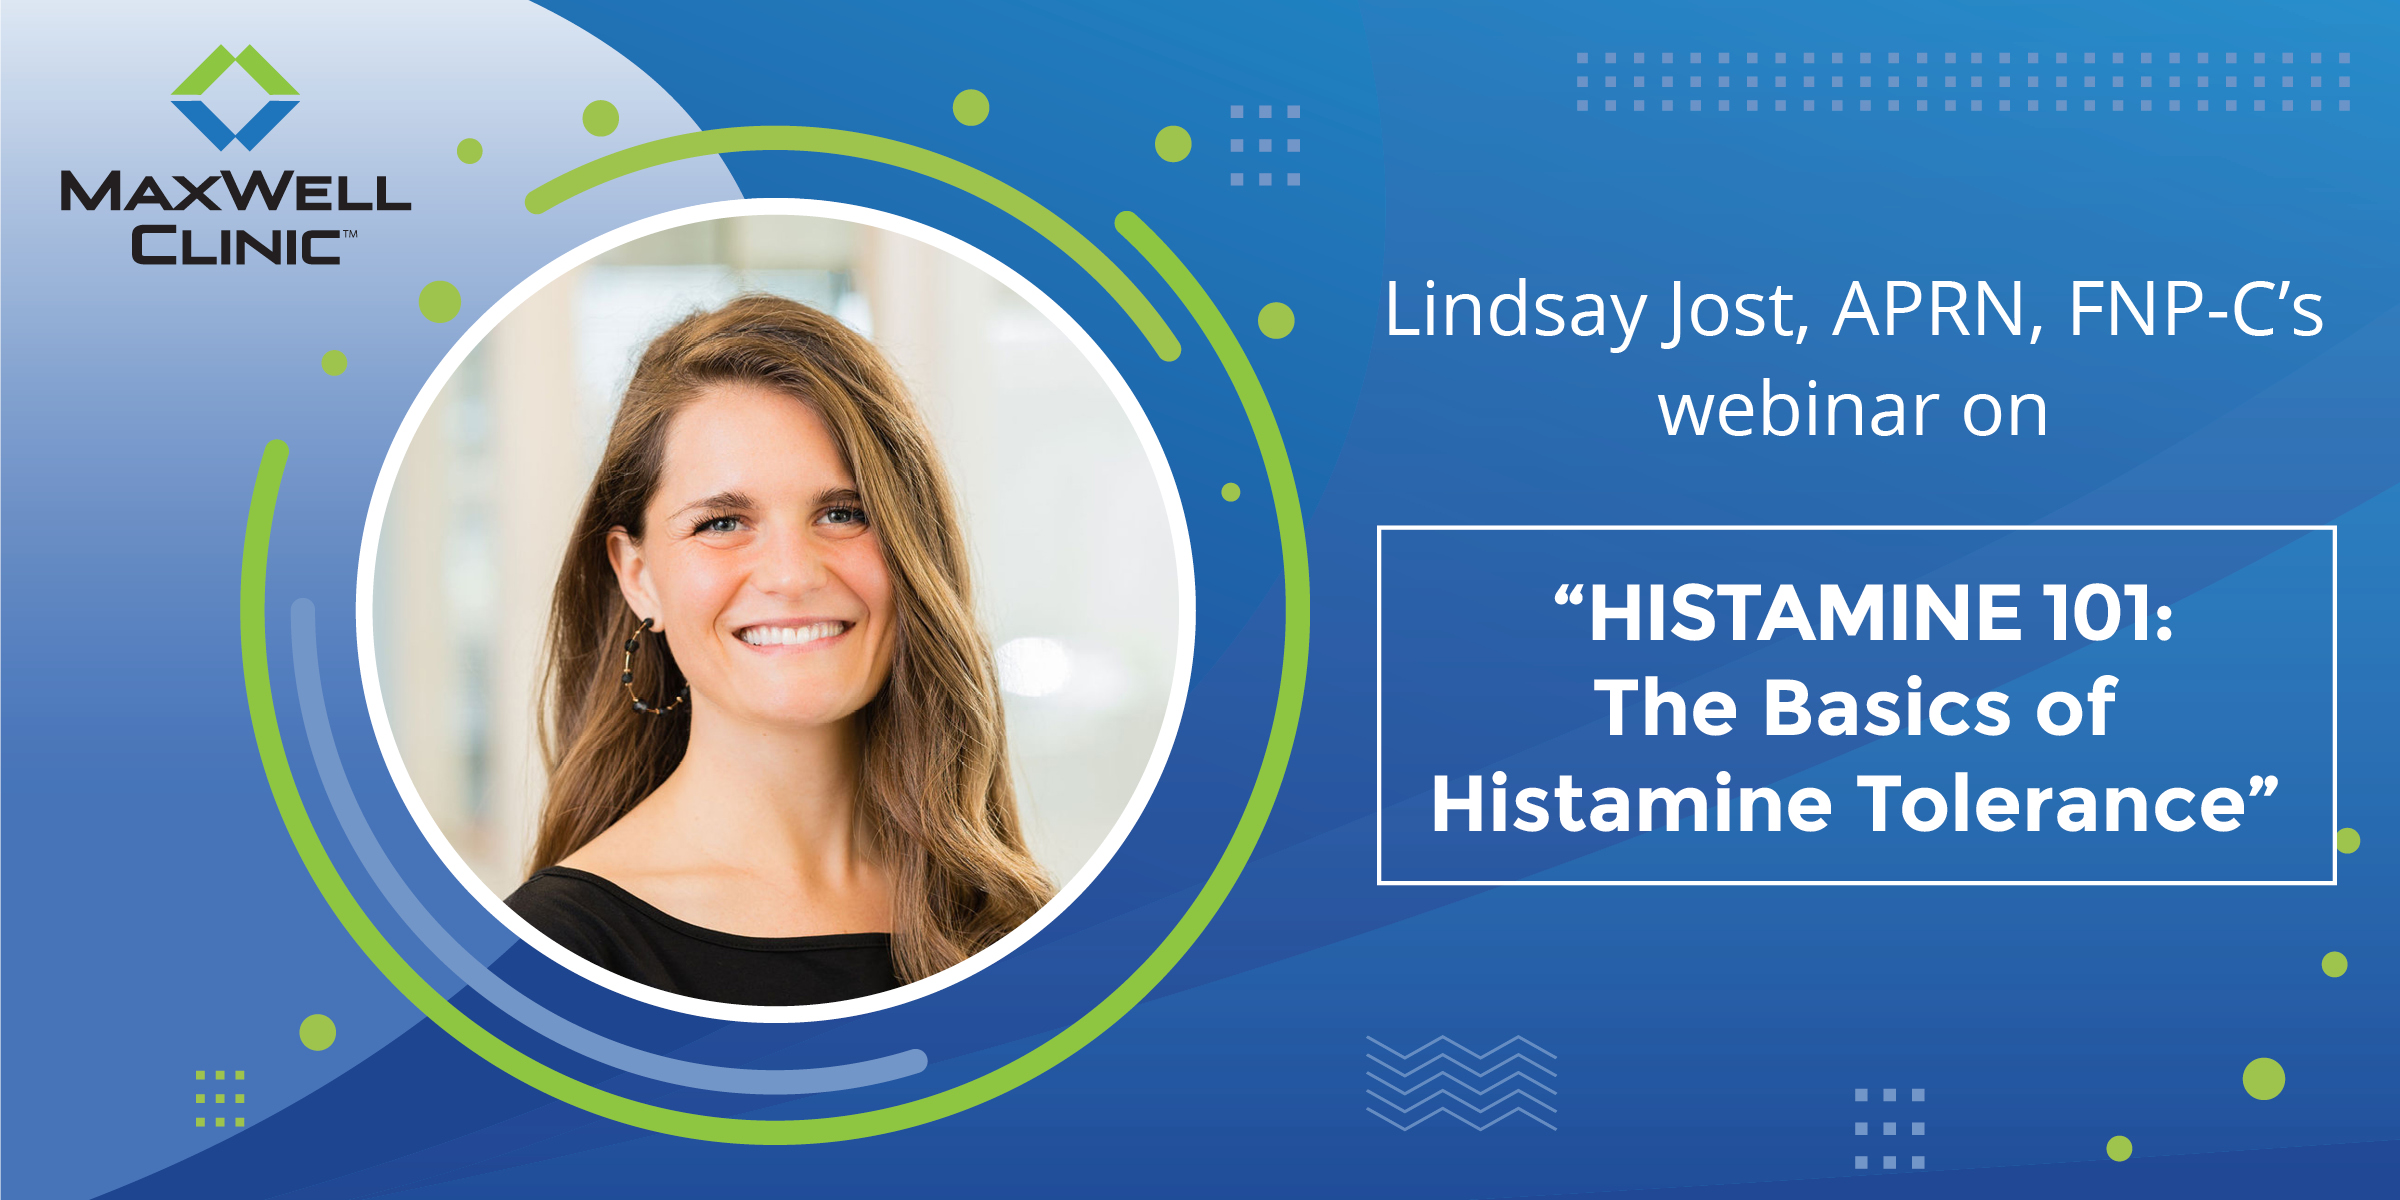 Histamine 101: The Basics of Histamine Intolerance with Lindsay Jost, APRN, FNC-P